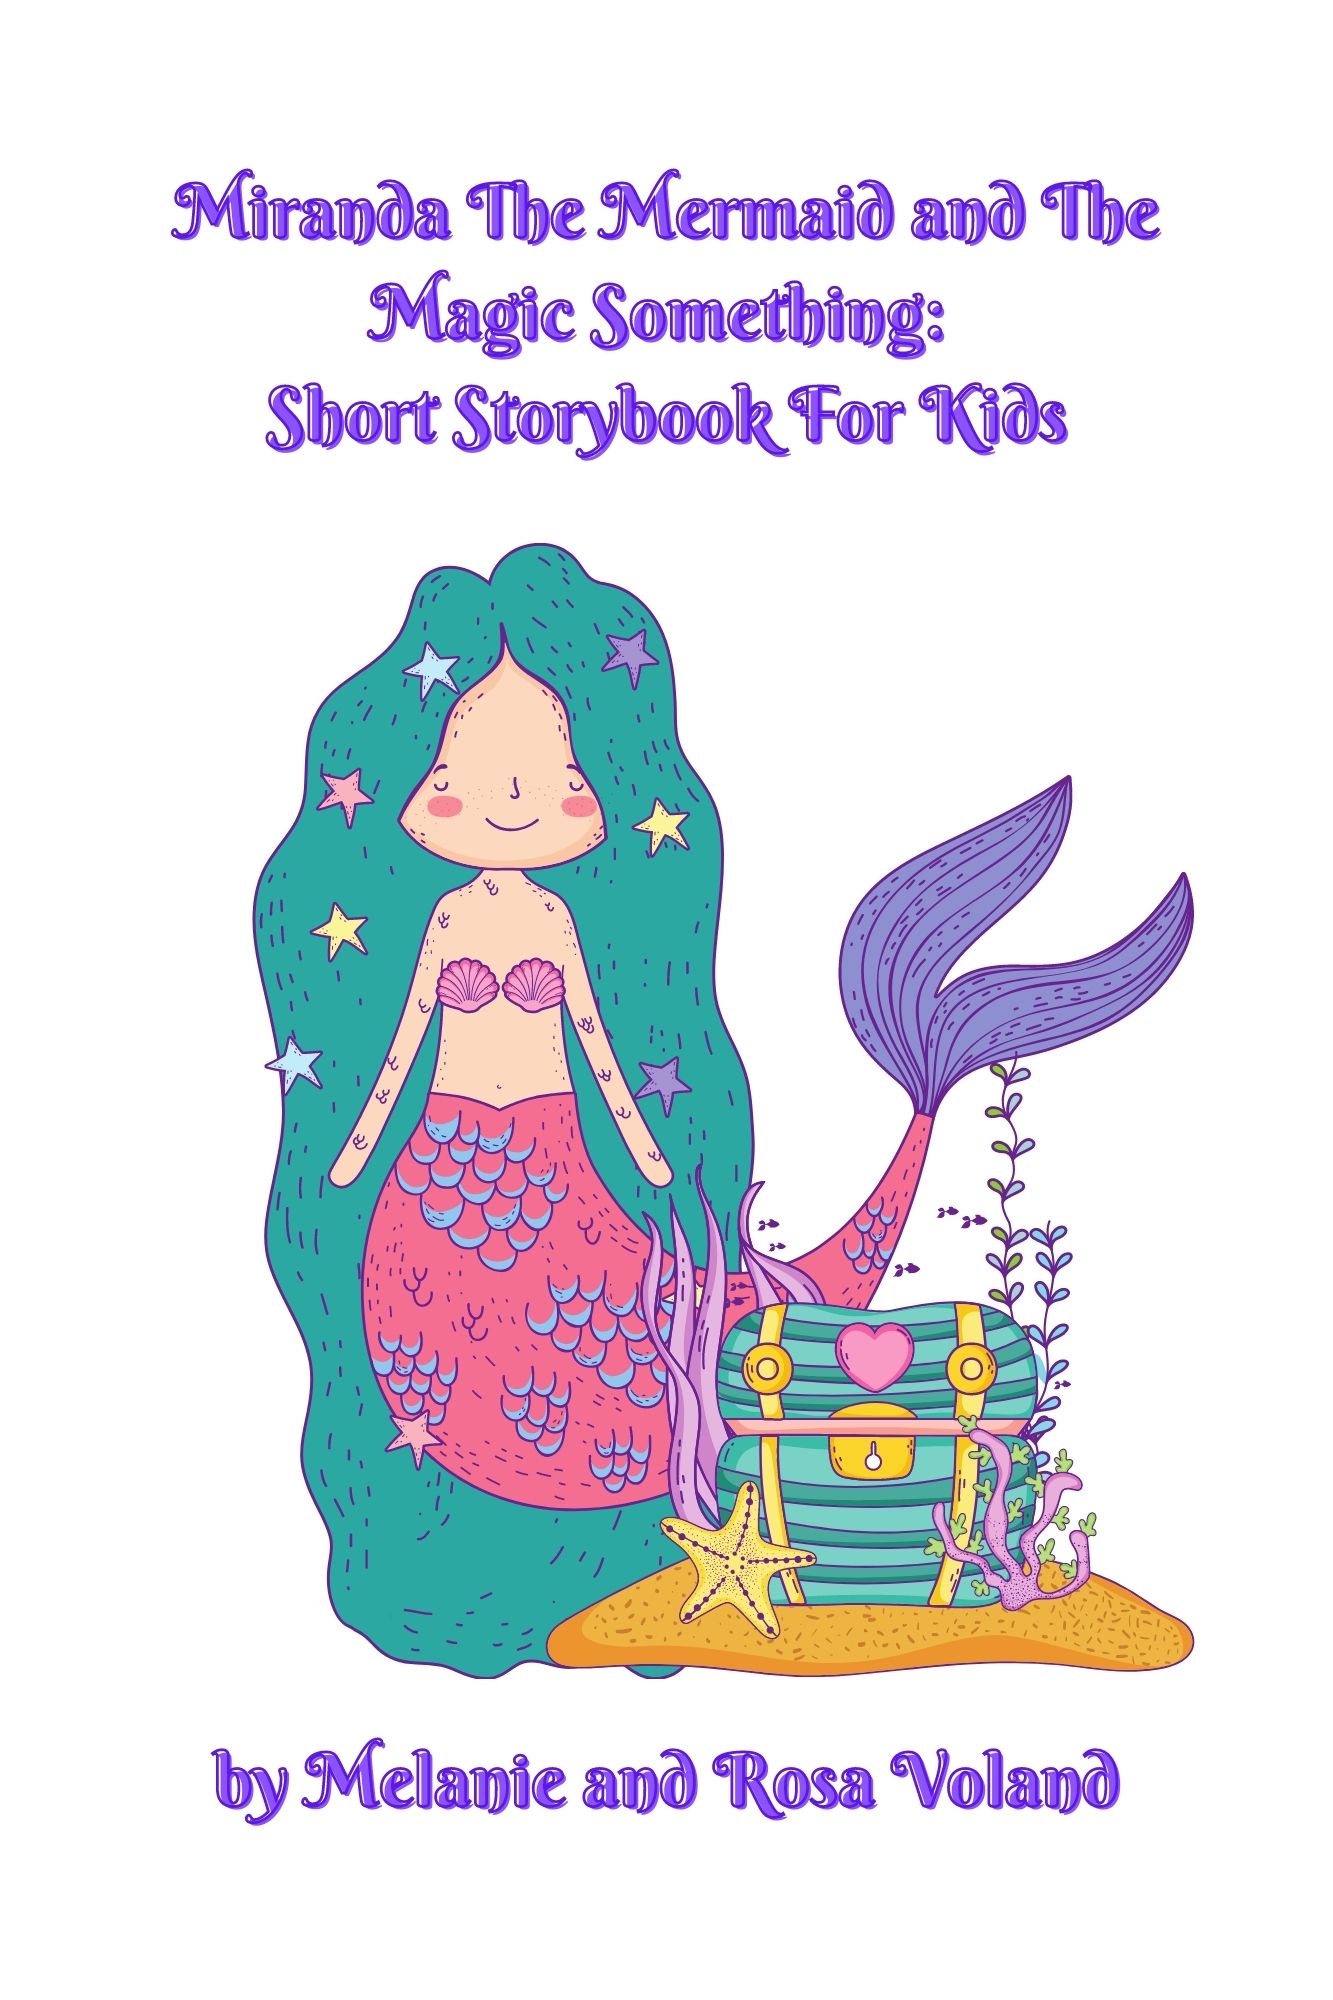 FREE: Miranda The Mermaid and The Magic Something: Short Storybook For Kids by Melanie and Rosa Voland